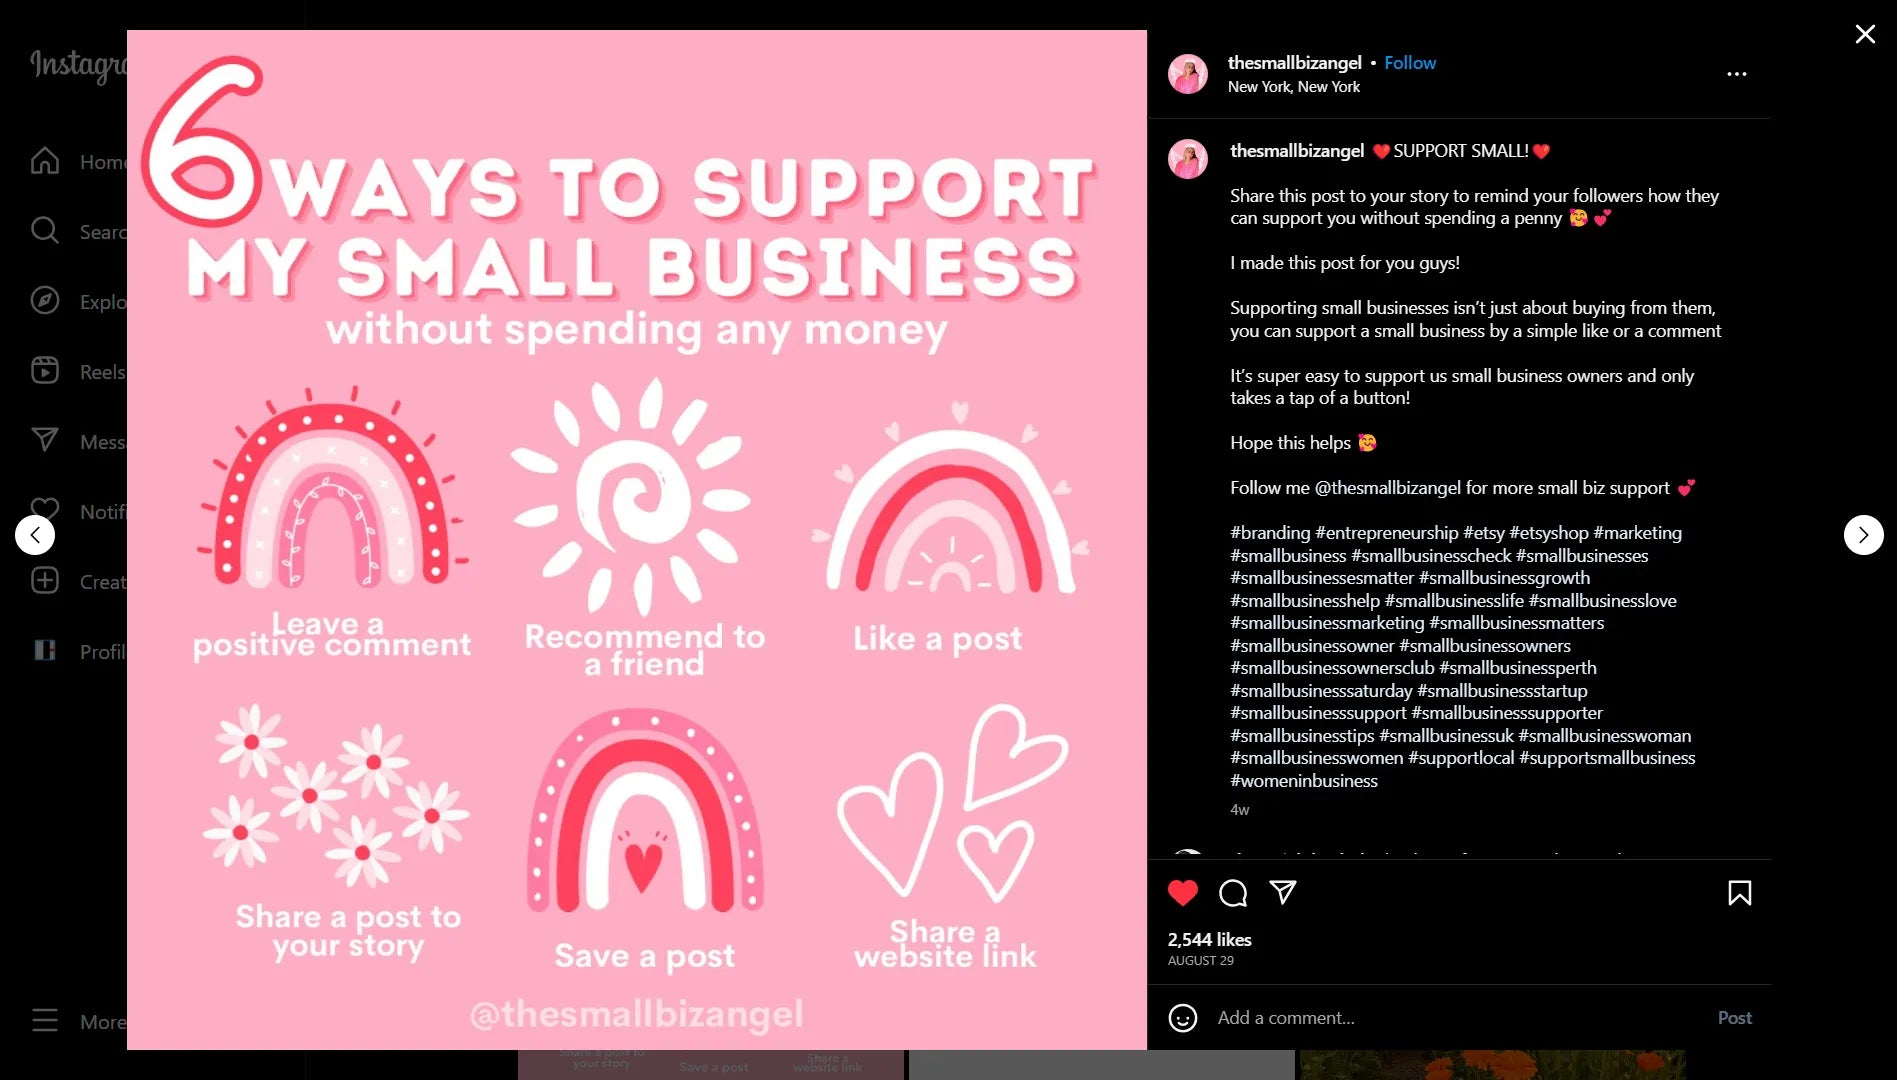 An Instagram post about supporting a small business